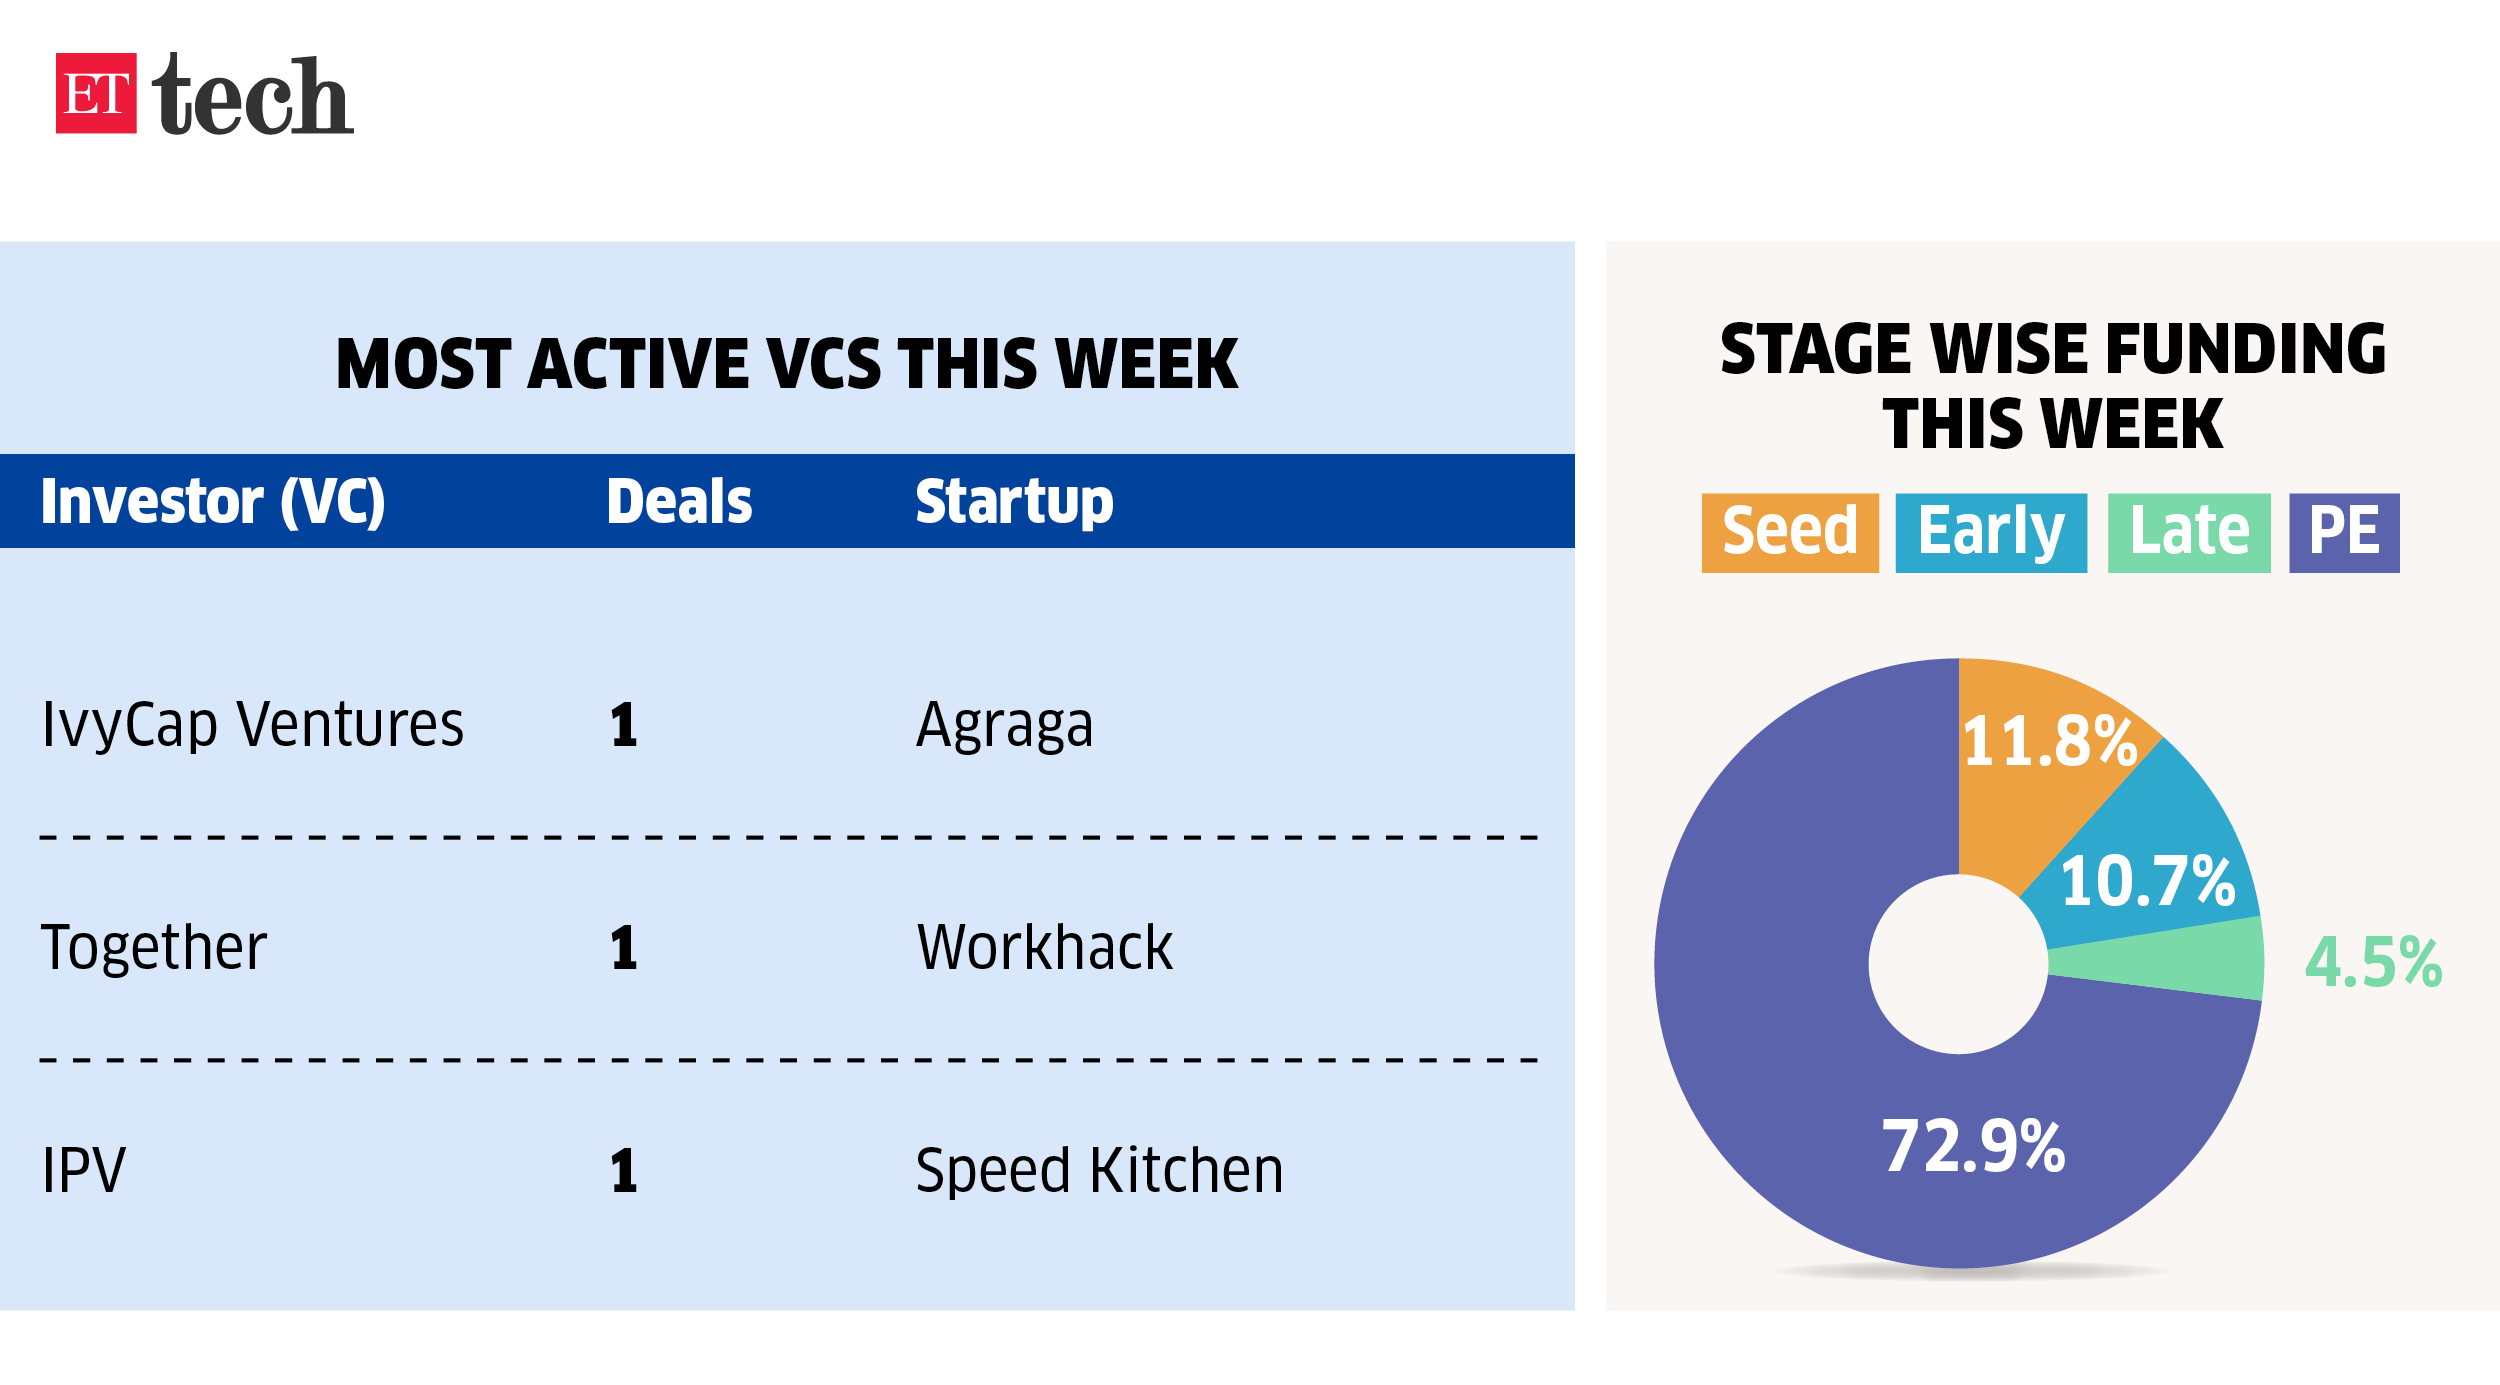 Most active VCs this week